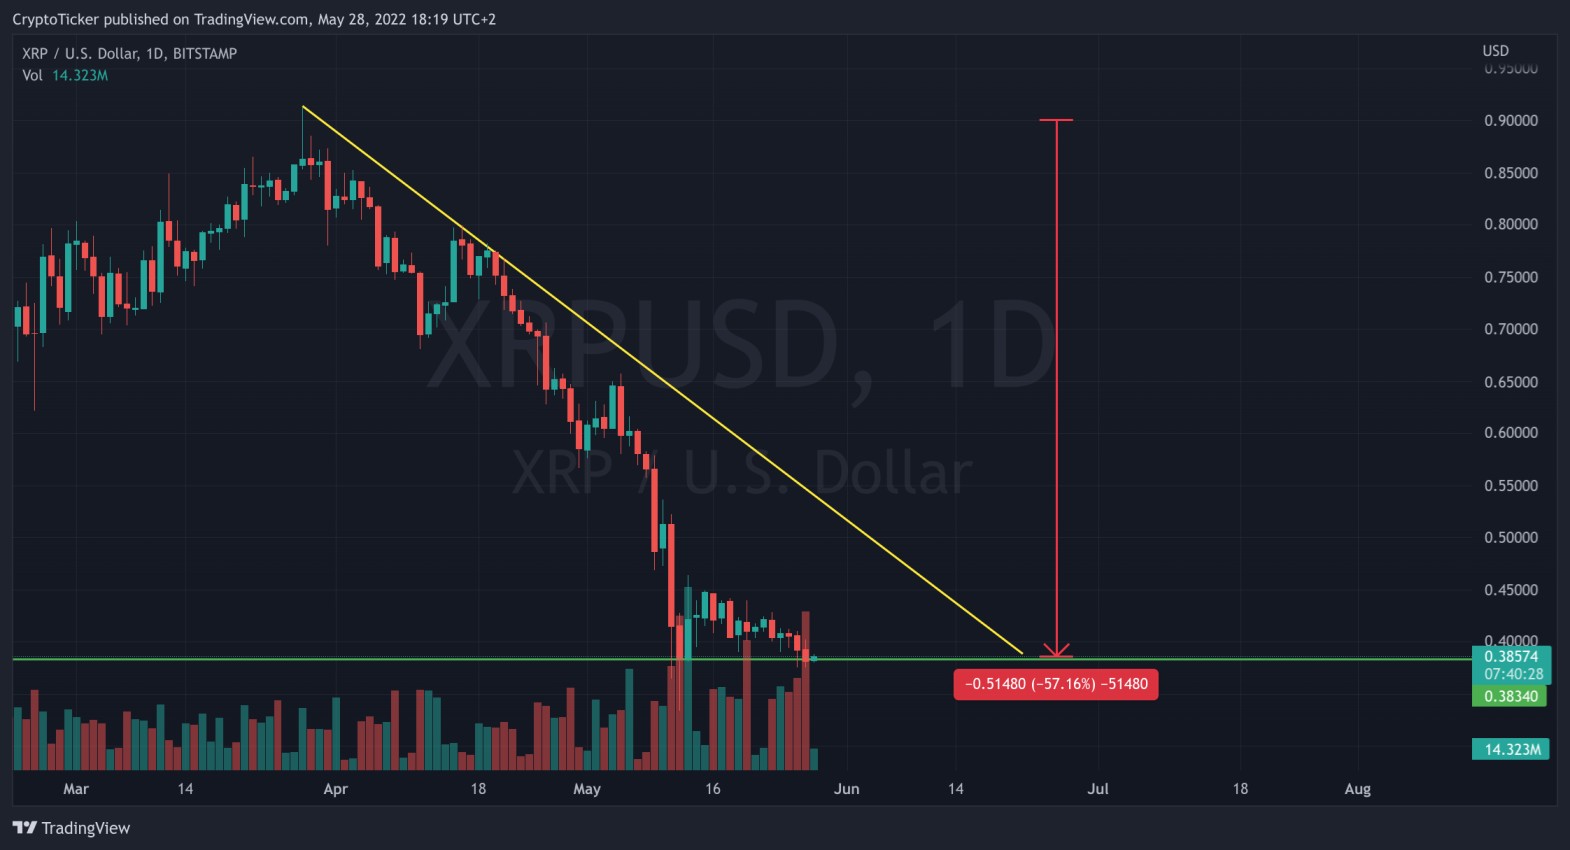 xrp crash to 10: XRP/USD 1-day chart showing the crash of XRP